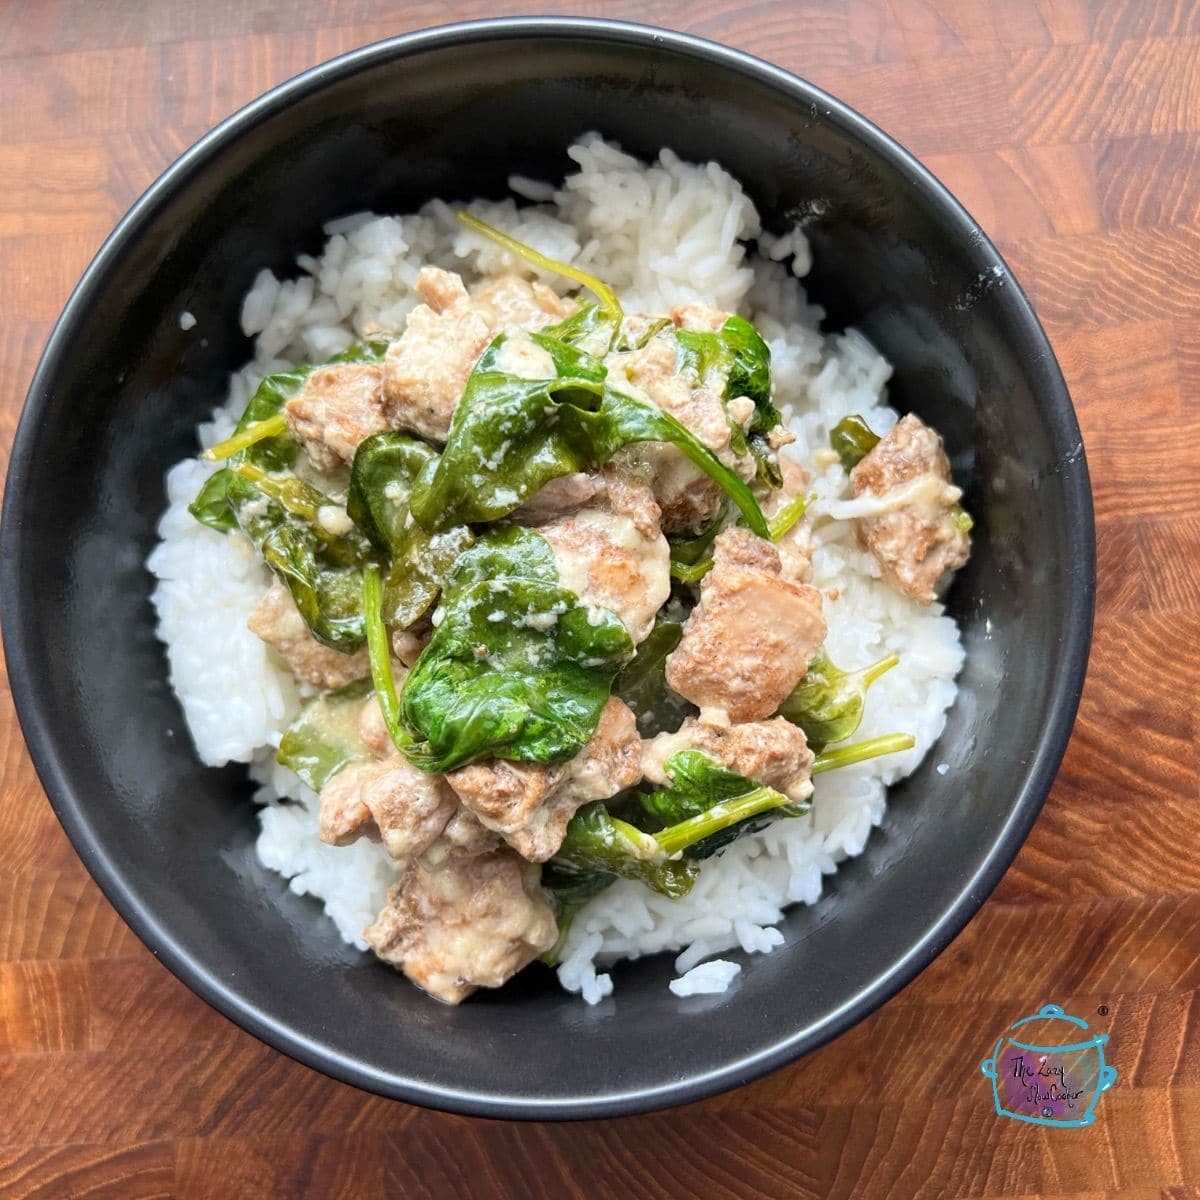 A round black bowl filled with creamy lemon chicken and spinach over rice